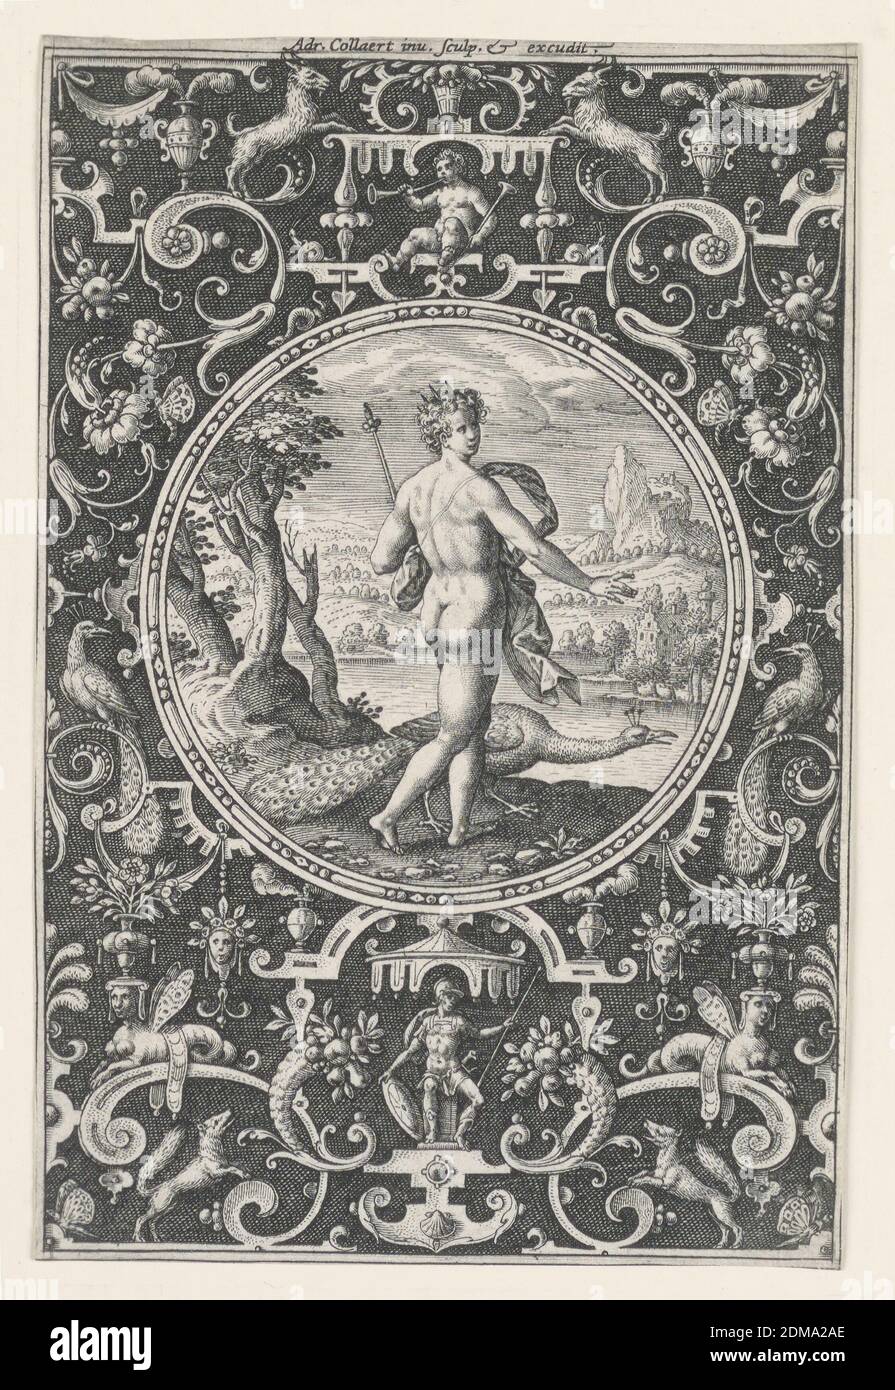 Juno, Plate 1, from the Judgement of Paris, Adriaen Collaert, Flemish, ca. 1560 – 1618, Engraving on off-white laid paper, Vertical panel with Juno in a landscape in a medallion at center. The figure, wearing a crown and holding a scepter, is seen from behind and looks back over his right shoulder. Surrounding the medallion, a dark background with grotesque ornament, including a soldier under a canopy at bottom center., Netherlands, ca. 1590, figures, Print Stock Photo